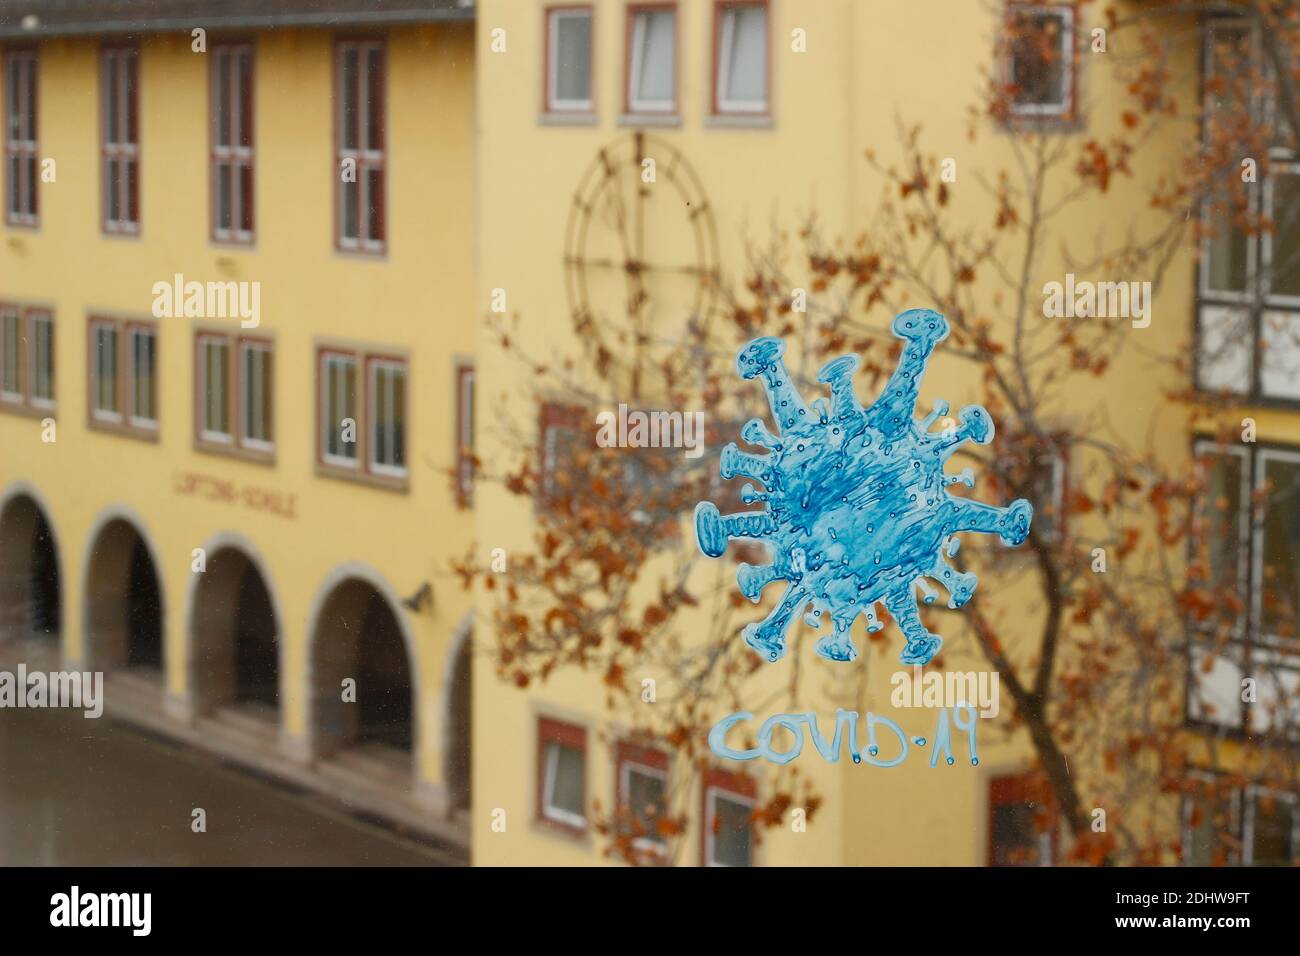 Coronavirus/Covid19 illustration with school in backround. Building with clock and schoolyard visible. Stock Photo